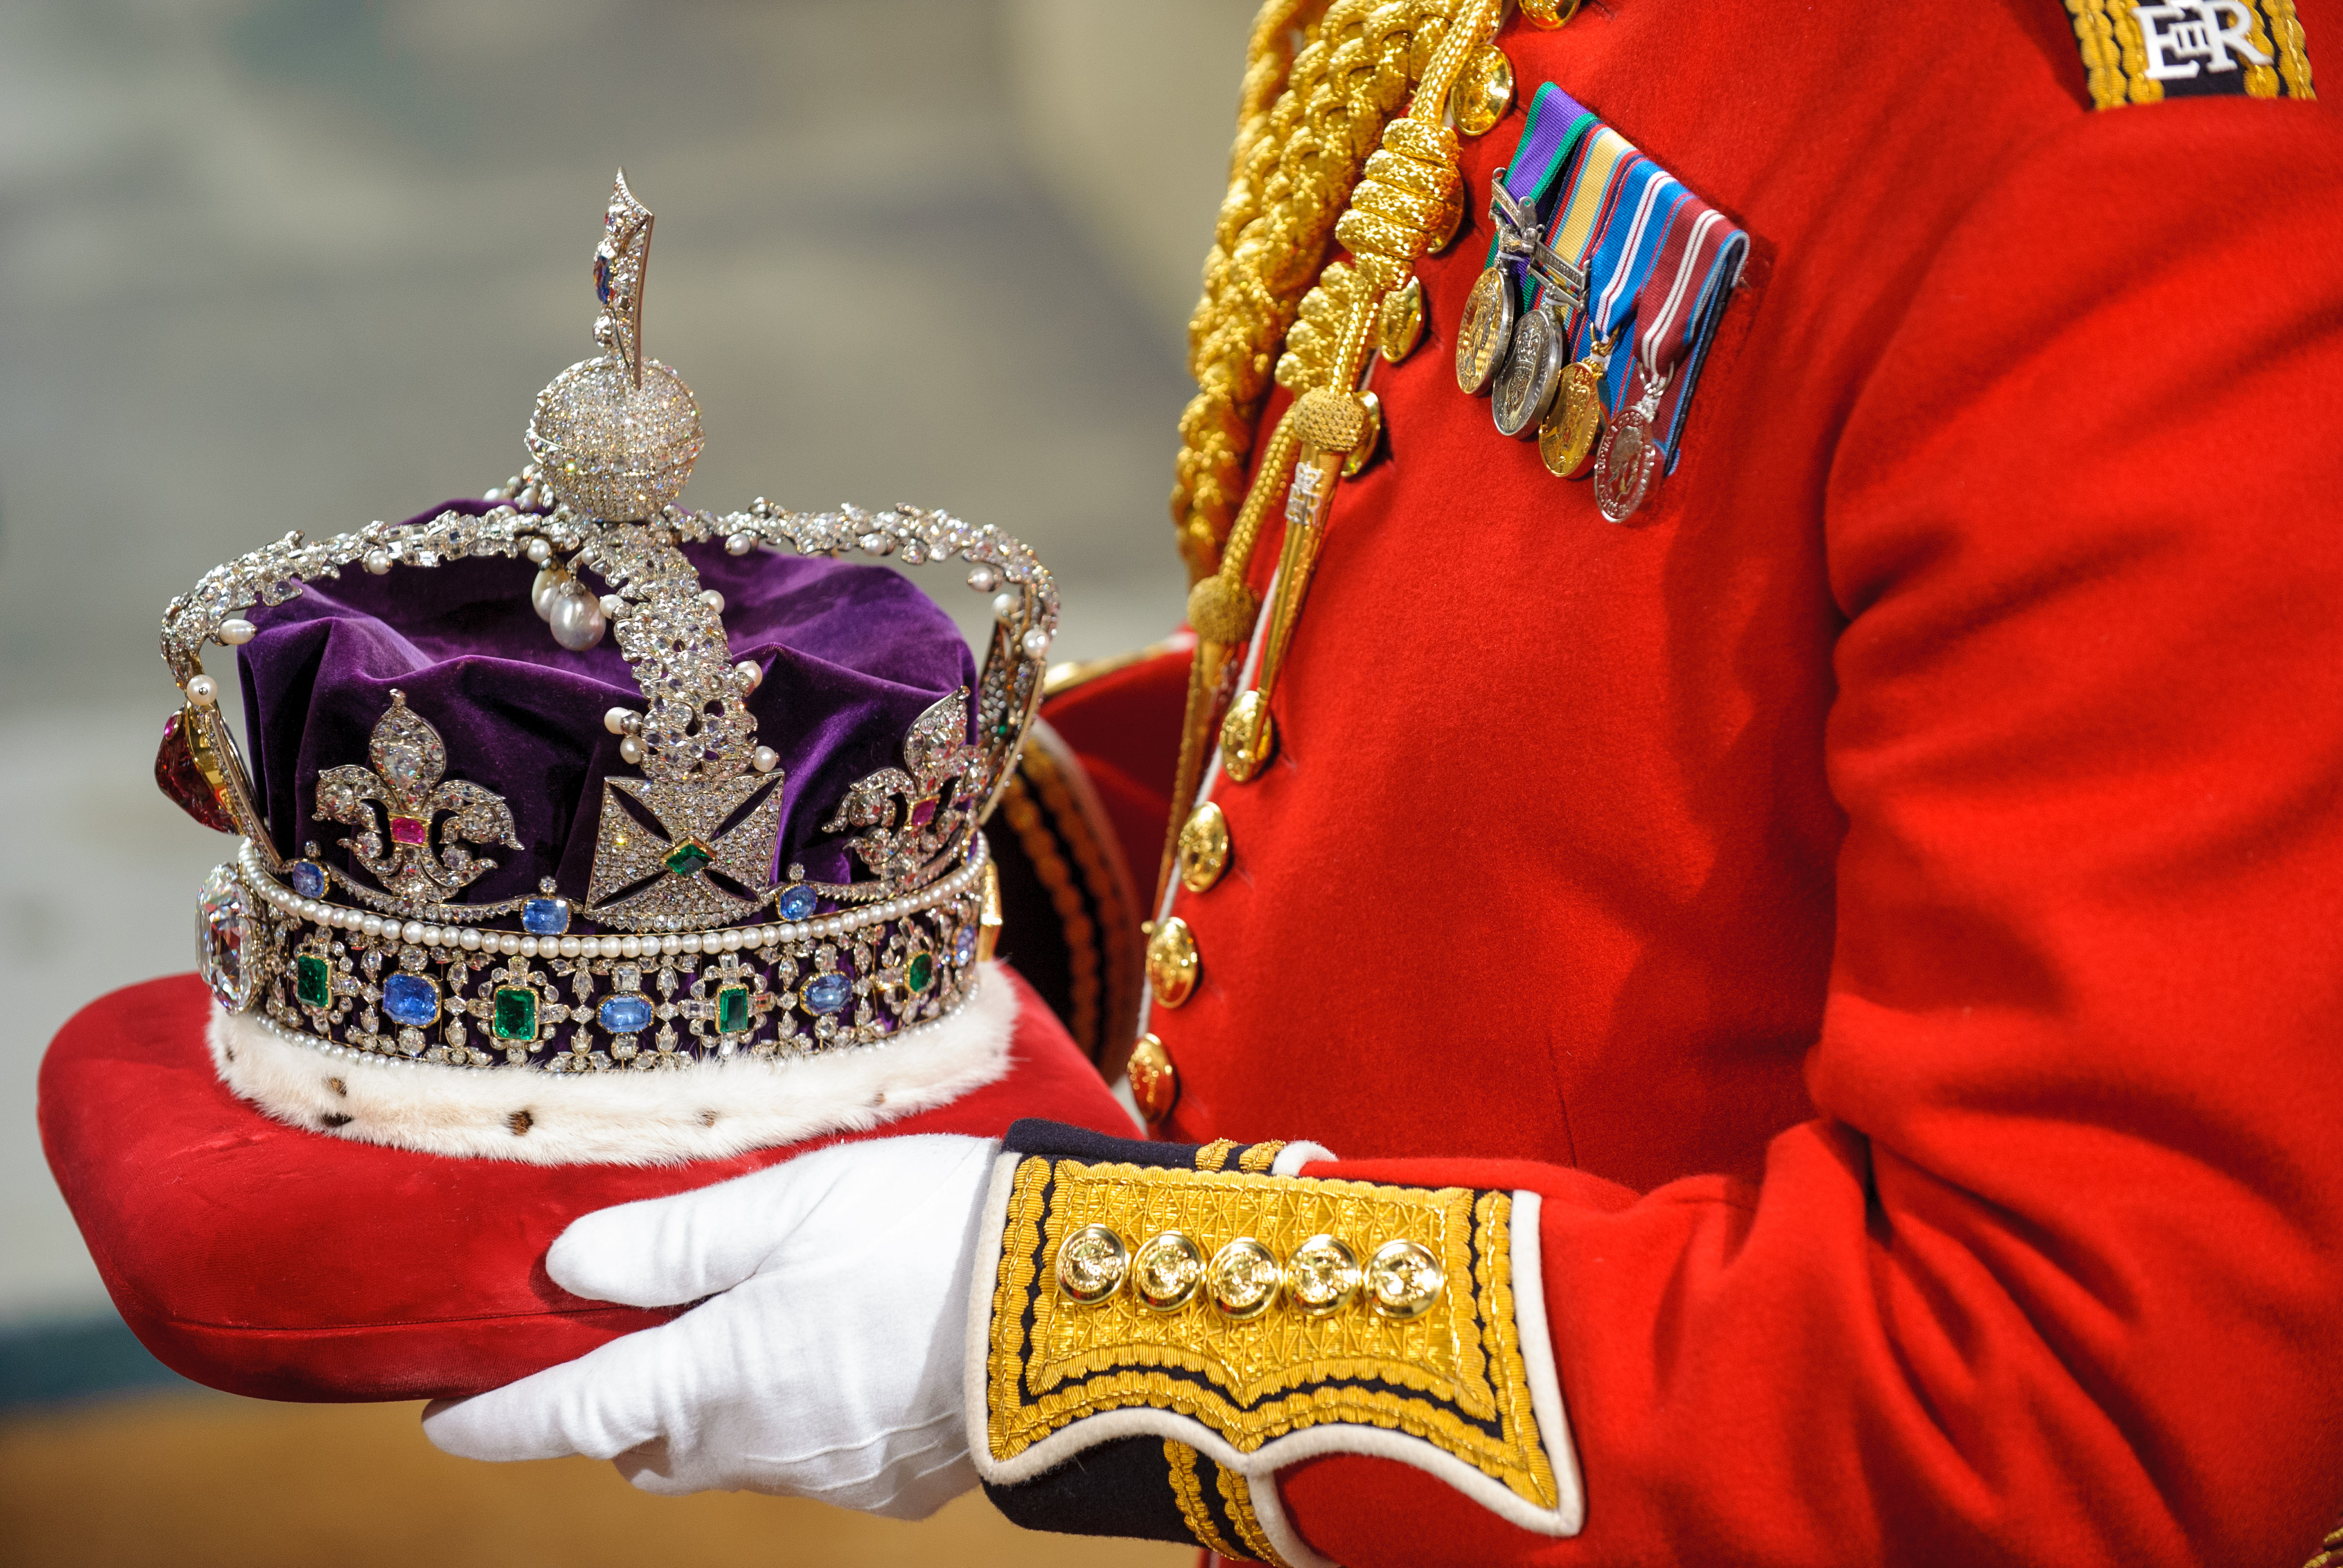 LONDON, ENGLAND - MAY 09: The Imperial State Crown is carried through the Norman Porch of the Palace of Westminster during the State Opening of Parliament on May 09, 2012 in London, England. Despite opposition from Conservative MPS, the Queen is expected to use her speech to push forward reforms in the House of Lords. Plans to split up banks and change rules on executive pay are also due to be addressed by the government. (Photo by Suzanne Plunkett - WPA Pool/Getty Images)